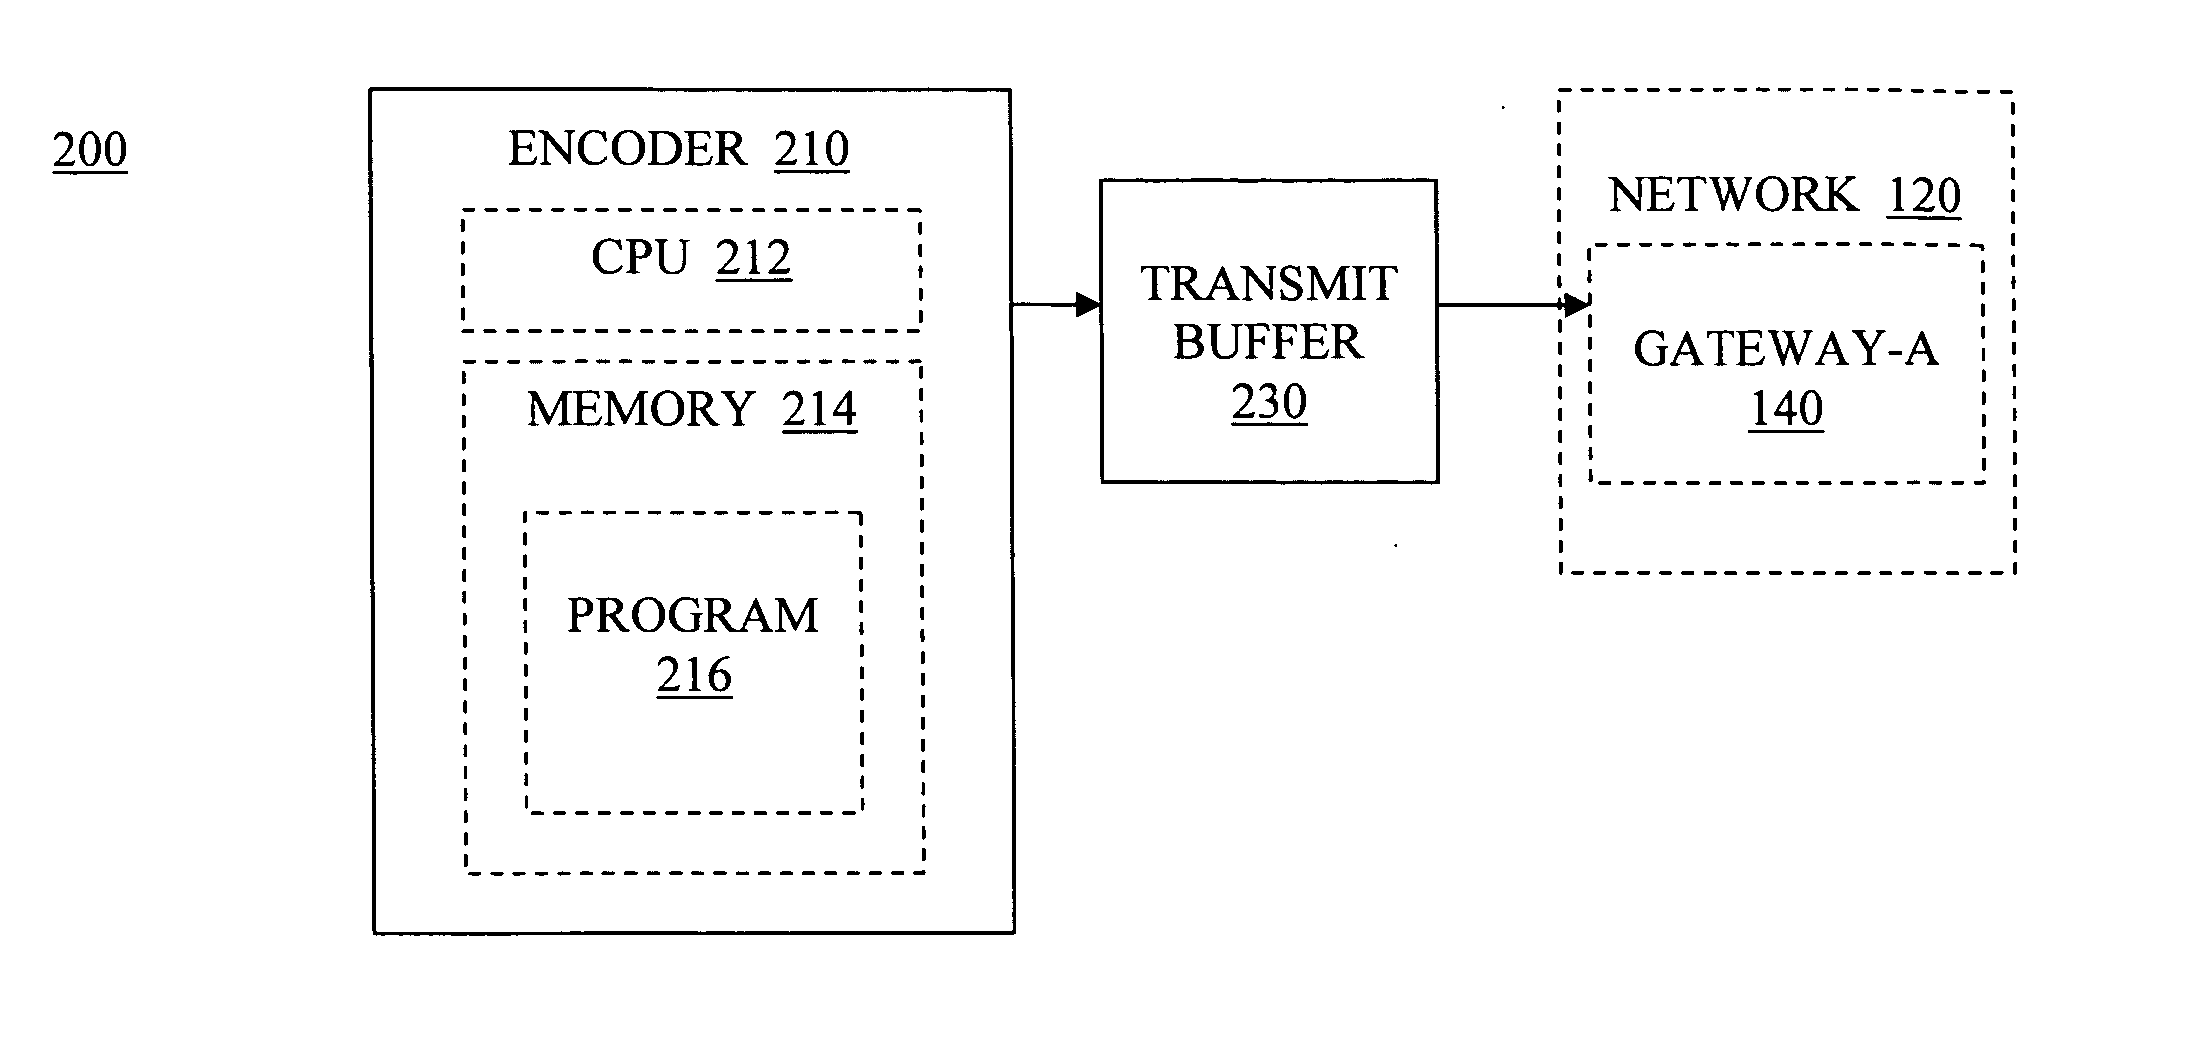 Devices, software and methods for measuring packet loss burstiness to determine quality of voice data transmission through a network